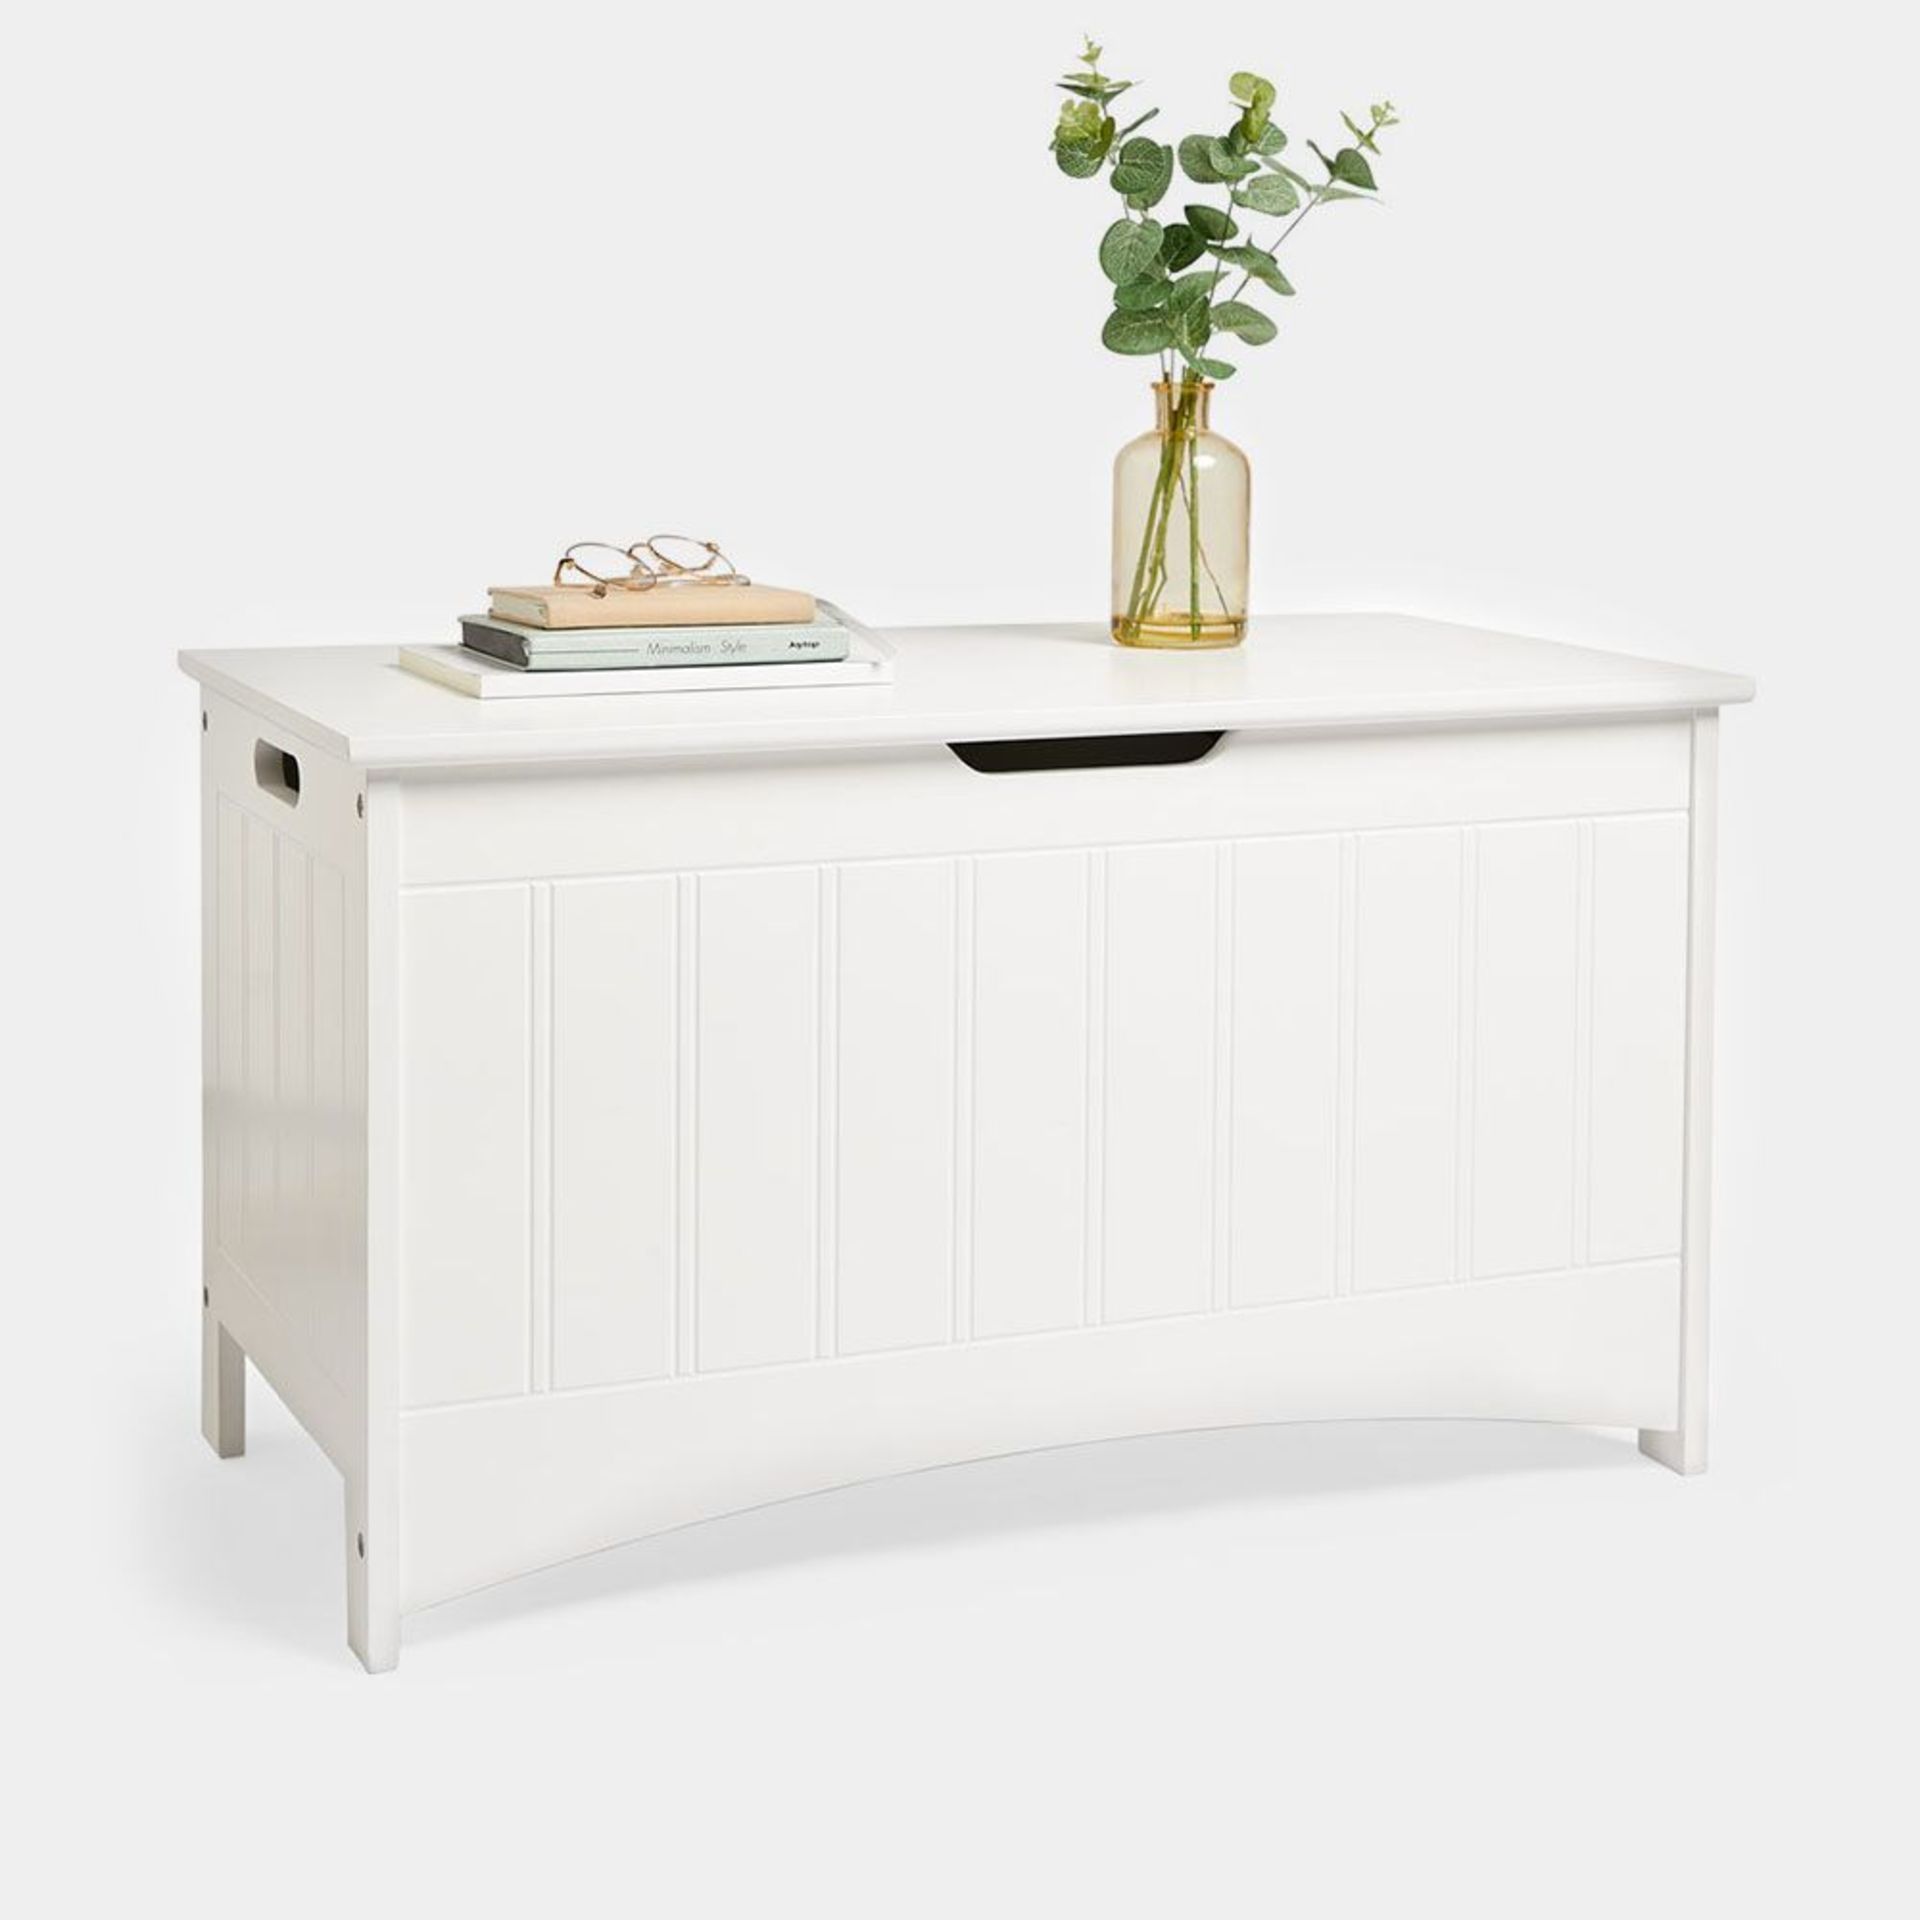 Colonial White Storage Box. - BI. Marrying period style with modern practicality, upgrade your décor